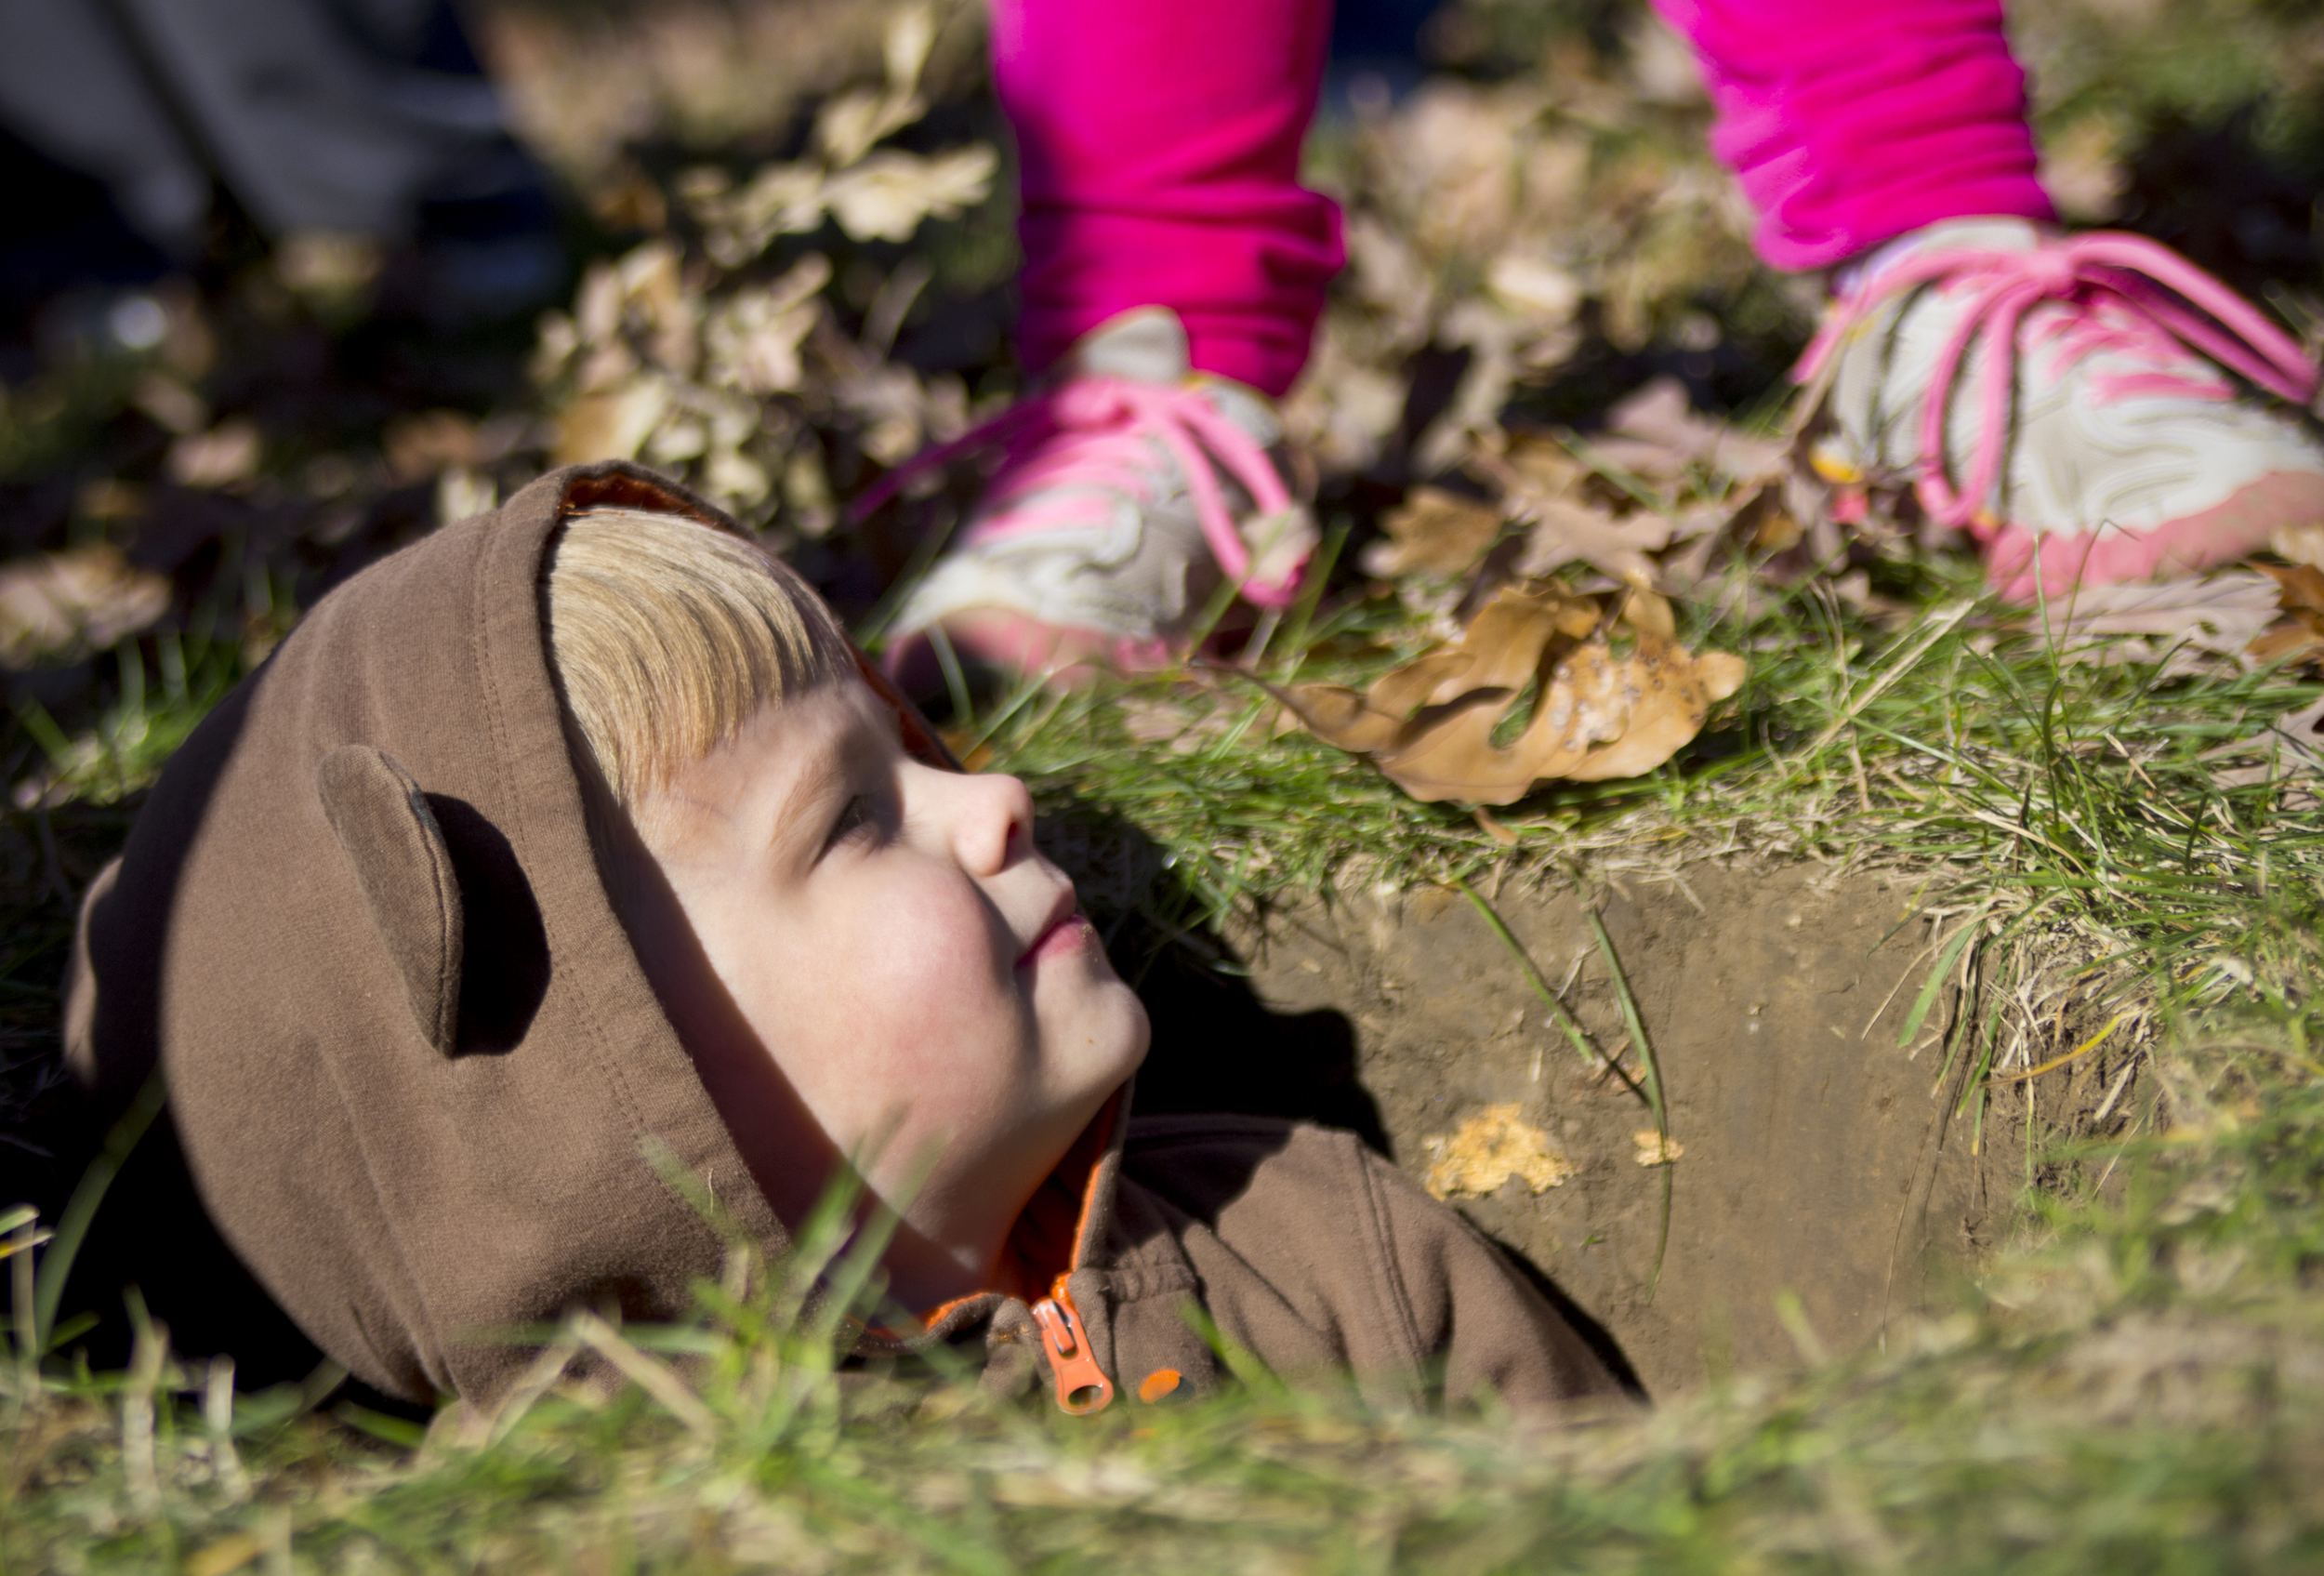  (March 22, 2014) Jared Kelly, 5, sits in a hole as students and families from Dennis Elementary School prepare the school's garden. 